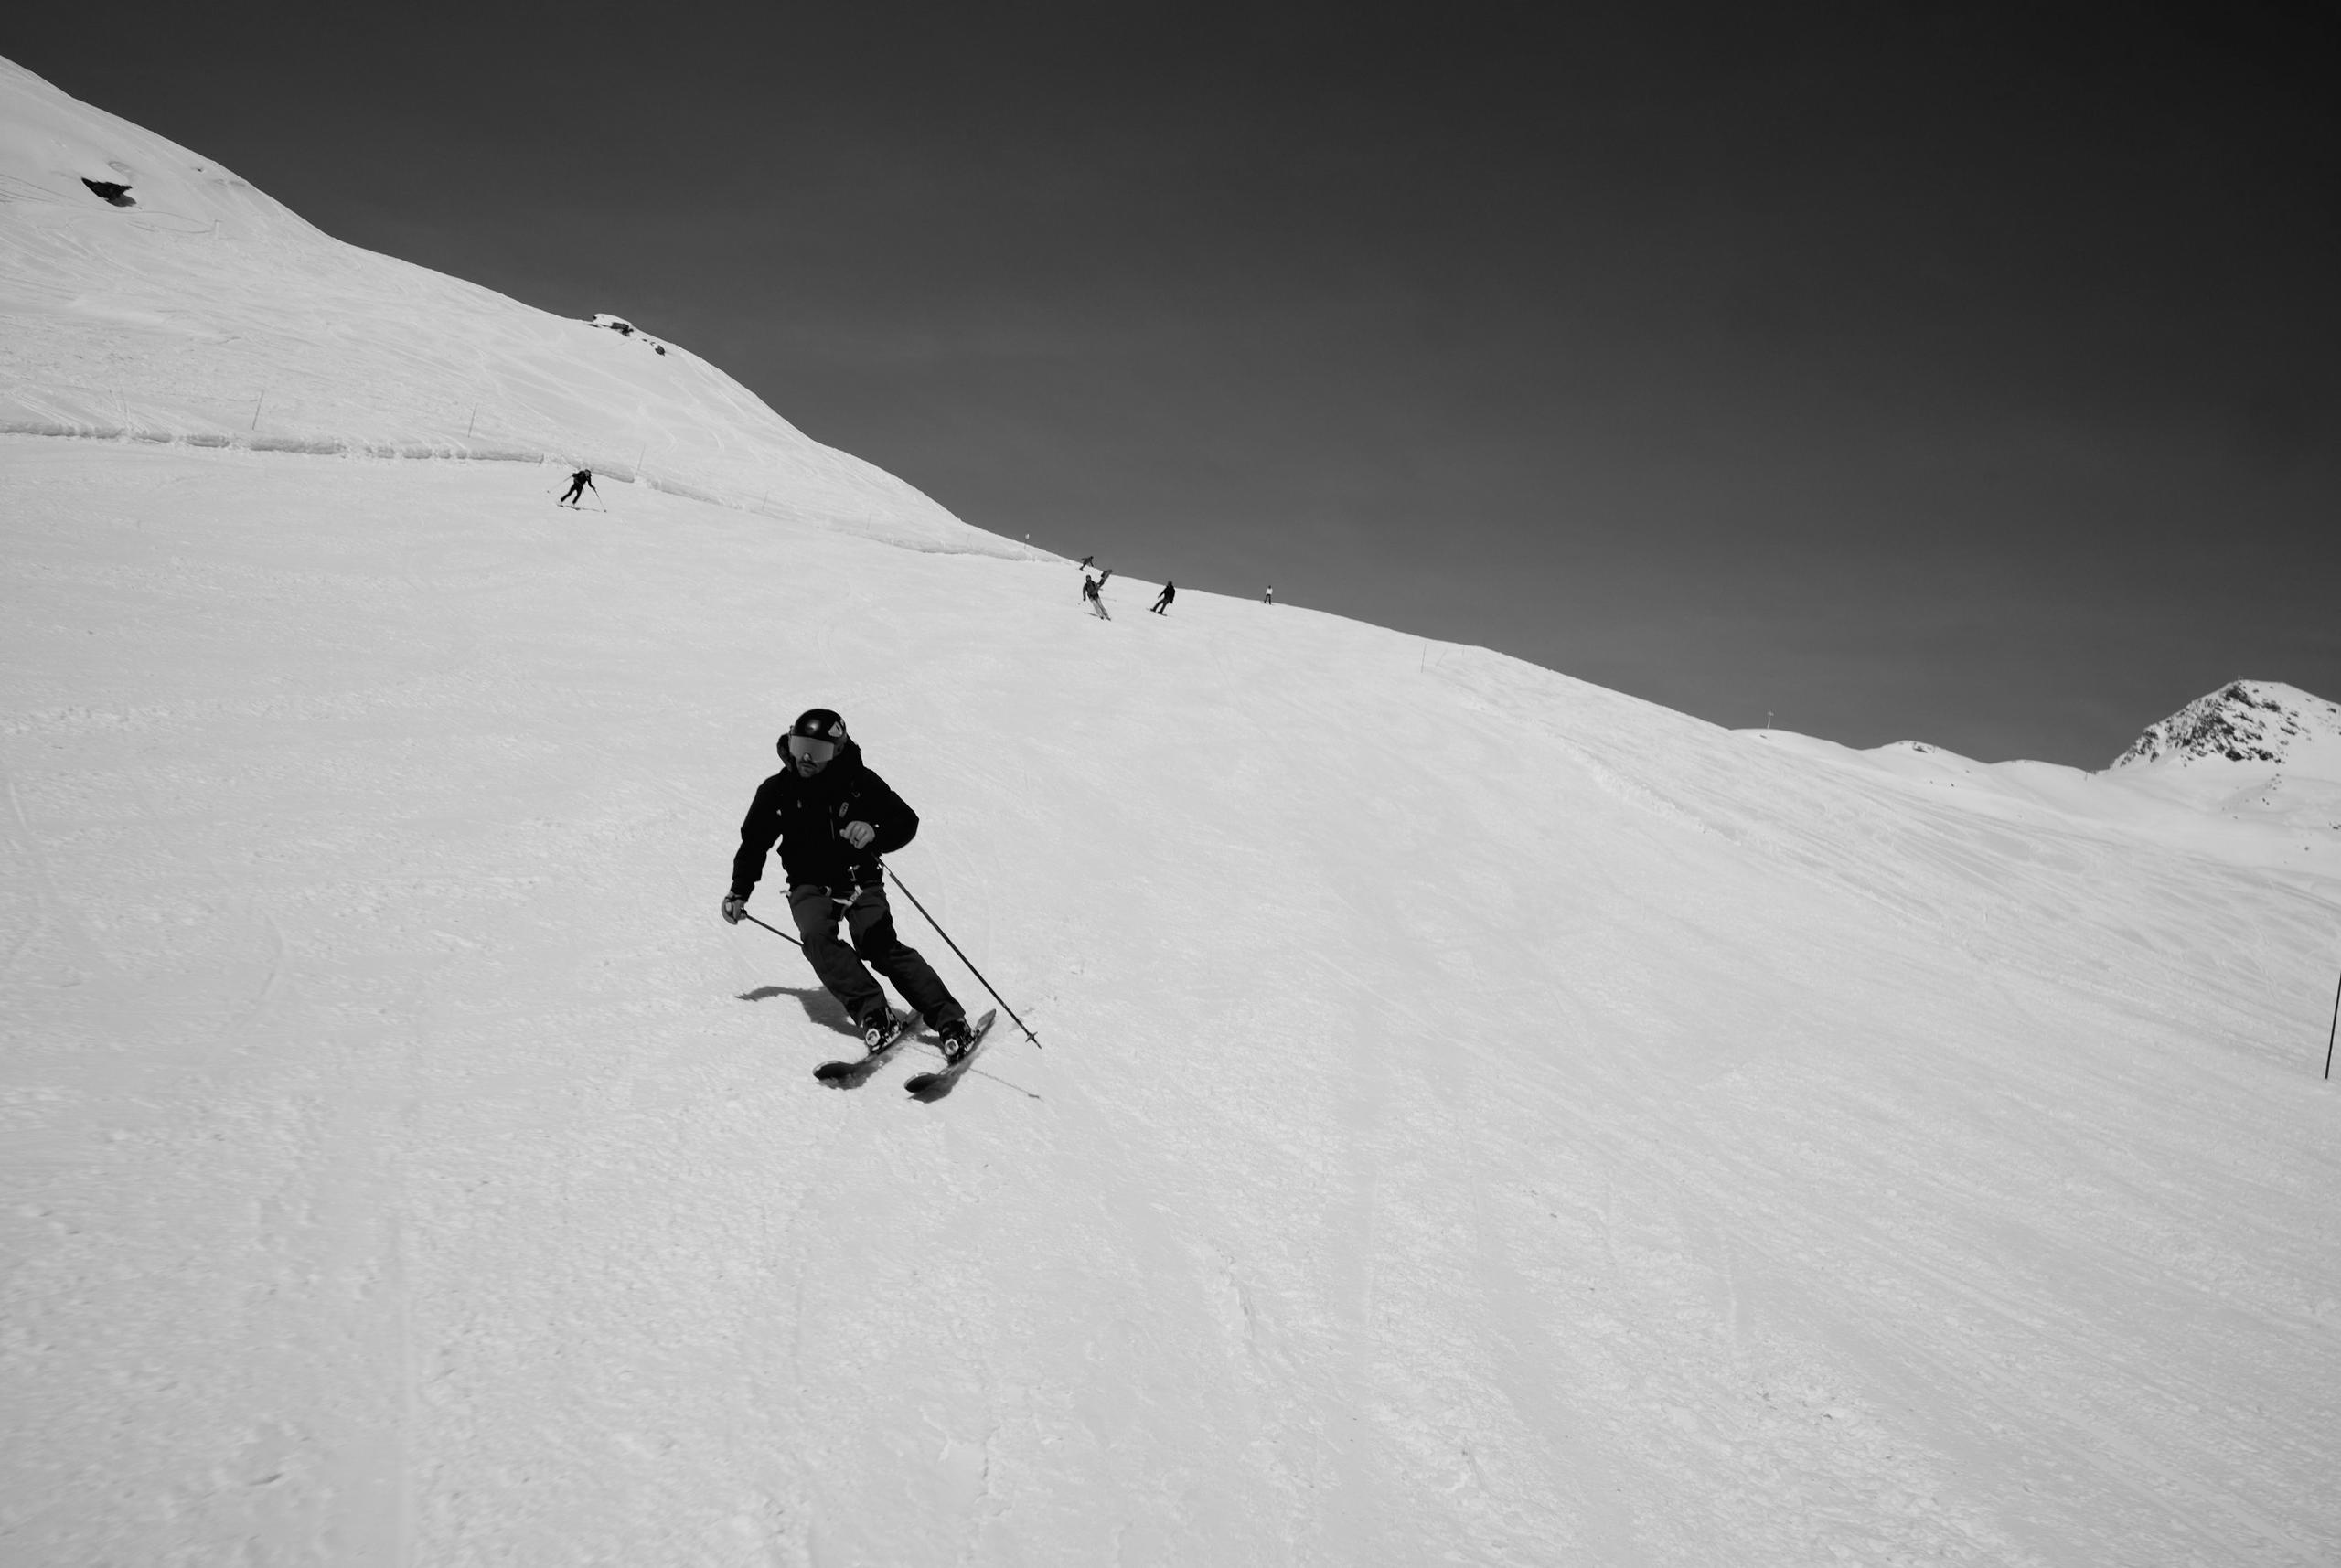 Man skiing down slope in French Alps